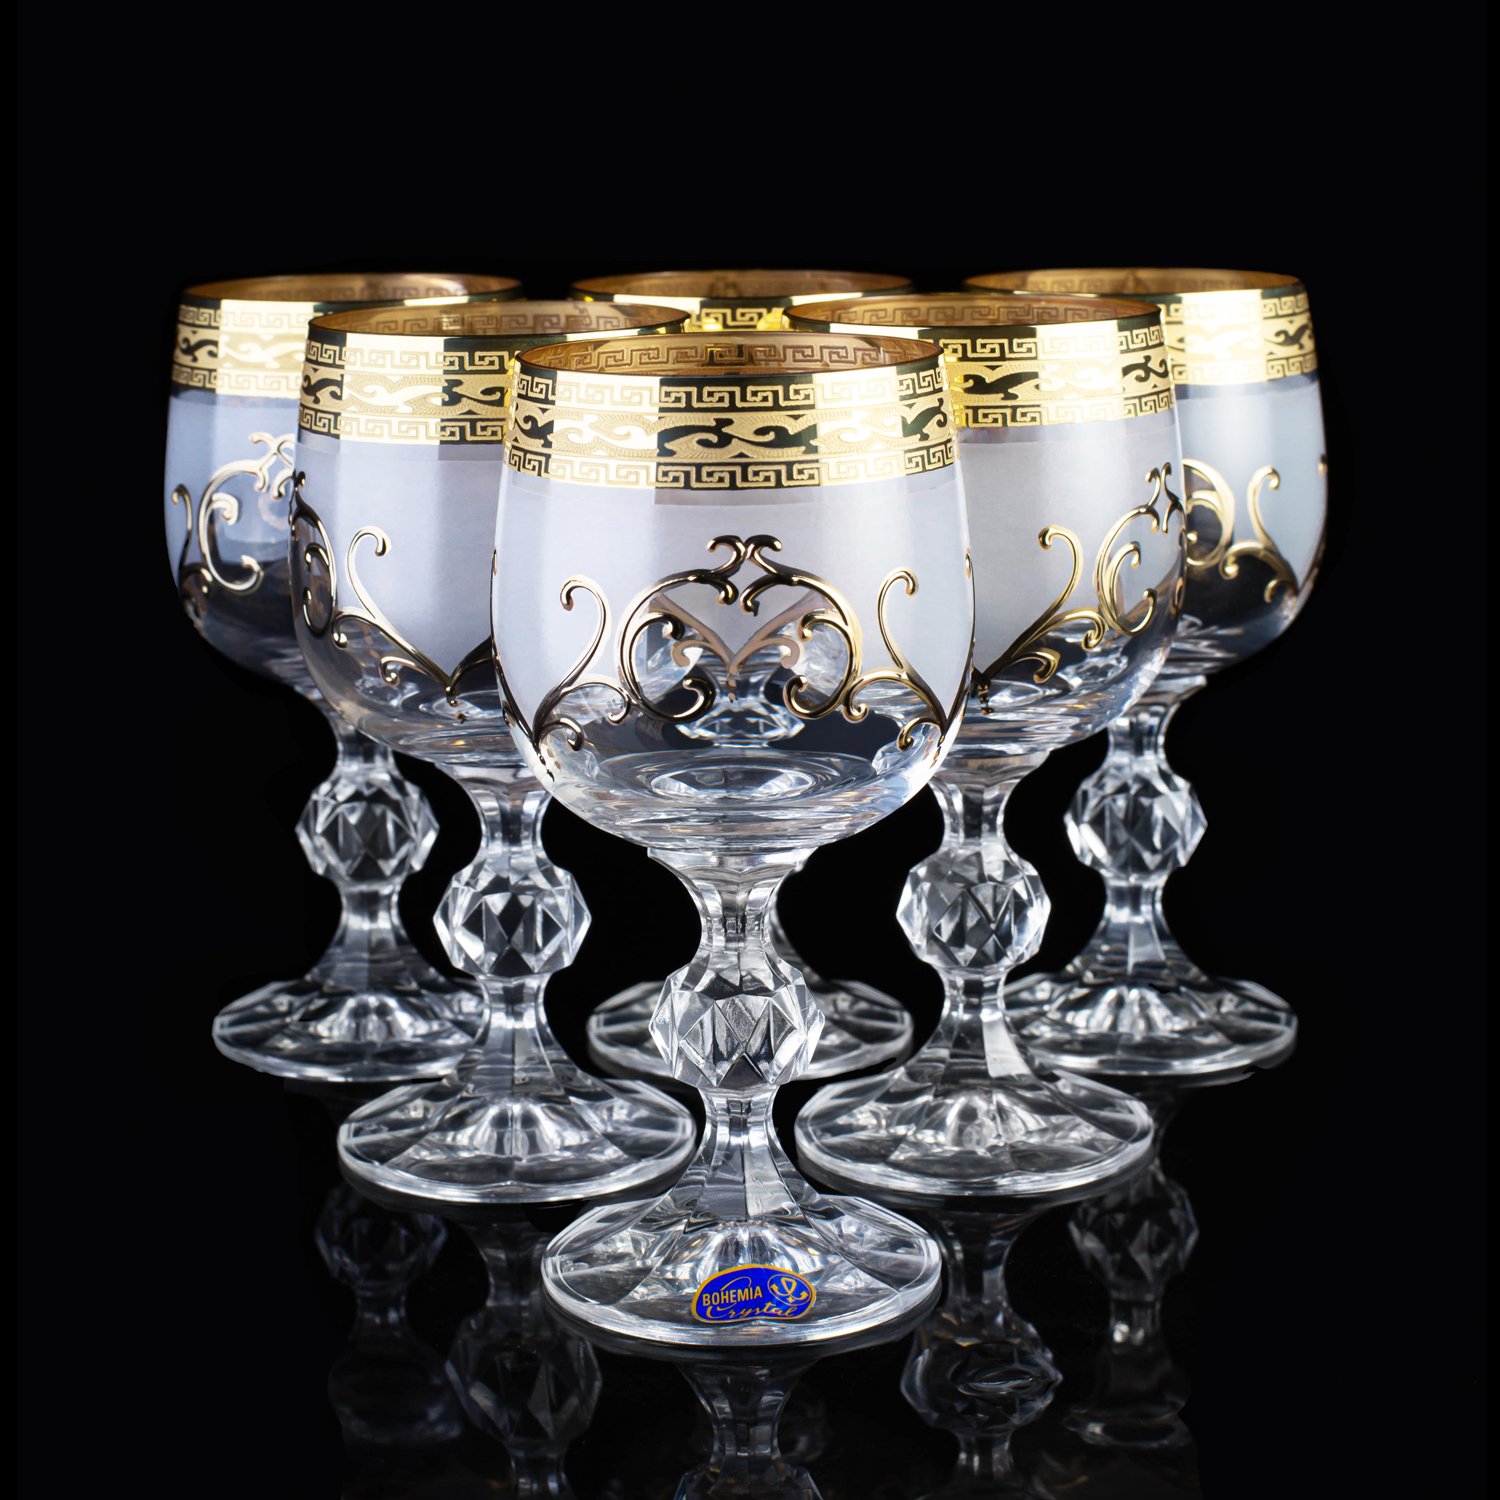 50 ml with Silver Engraved and Gold Border 50 ml Bohemia Exclusive Crystal Liqueur Glasses Claudia Set of 6 